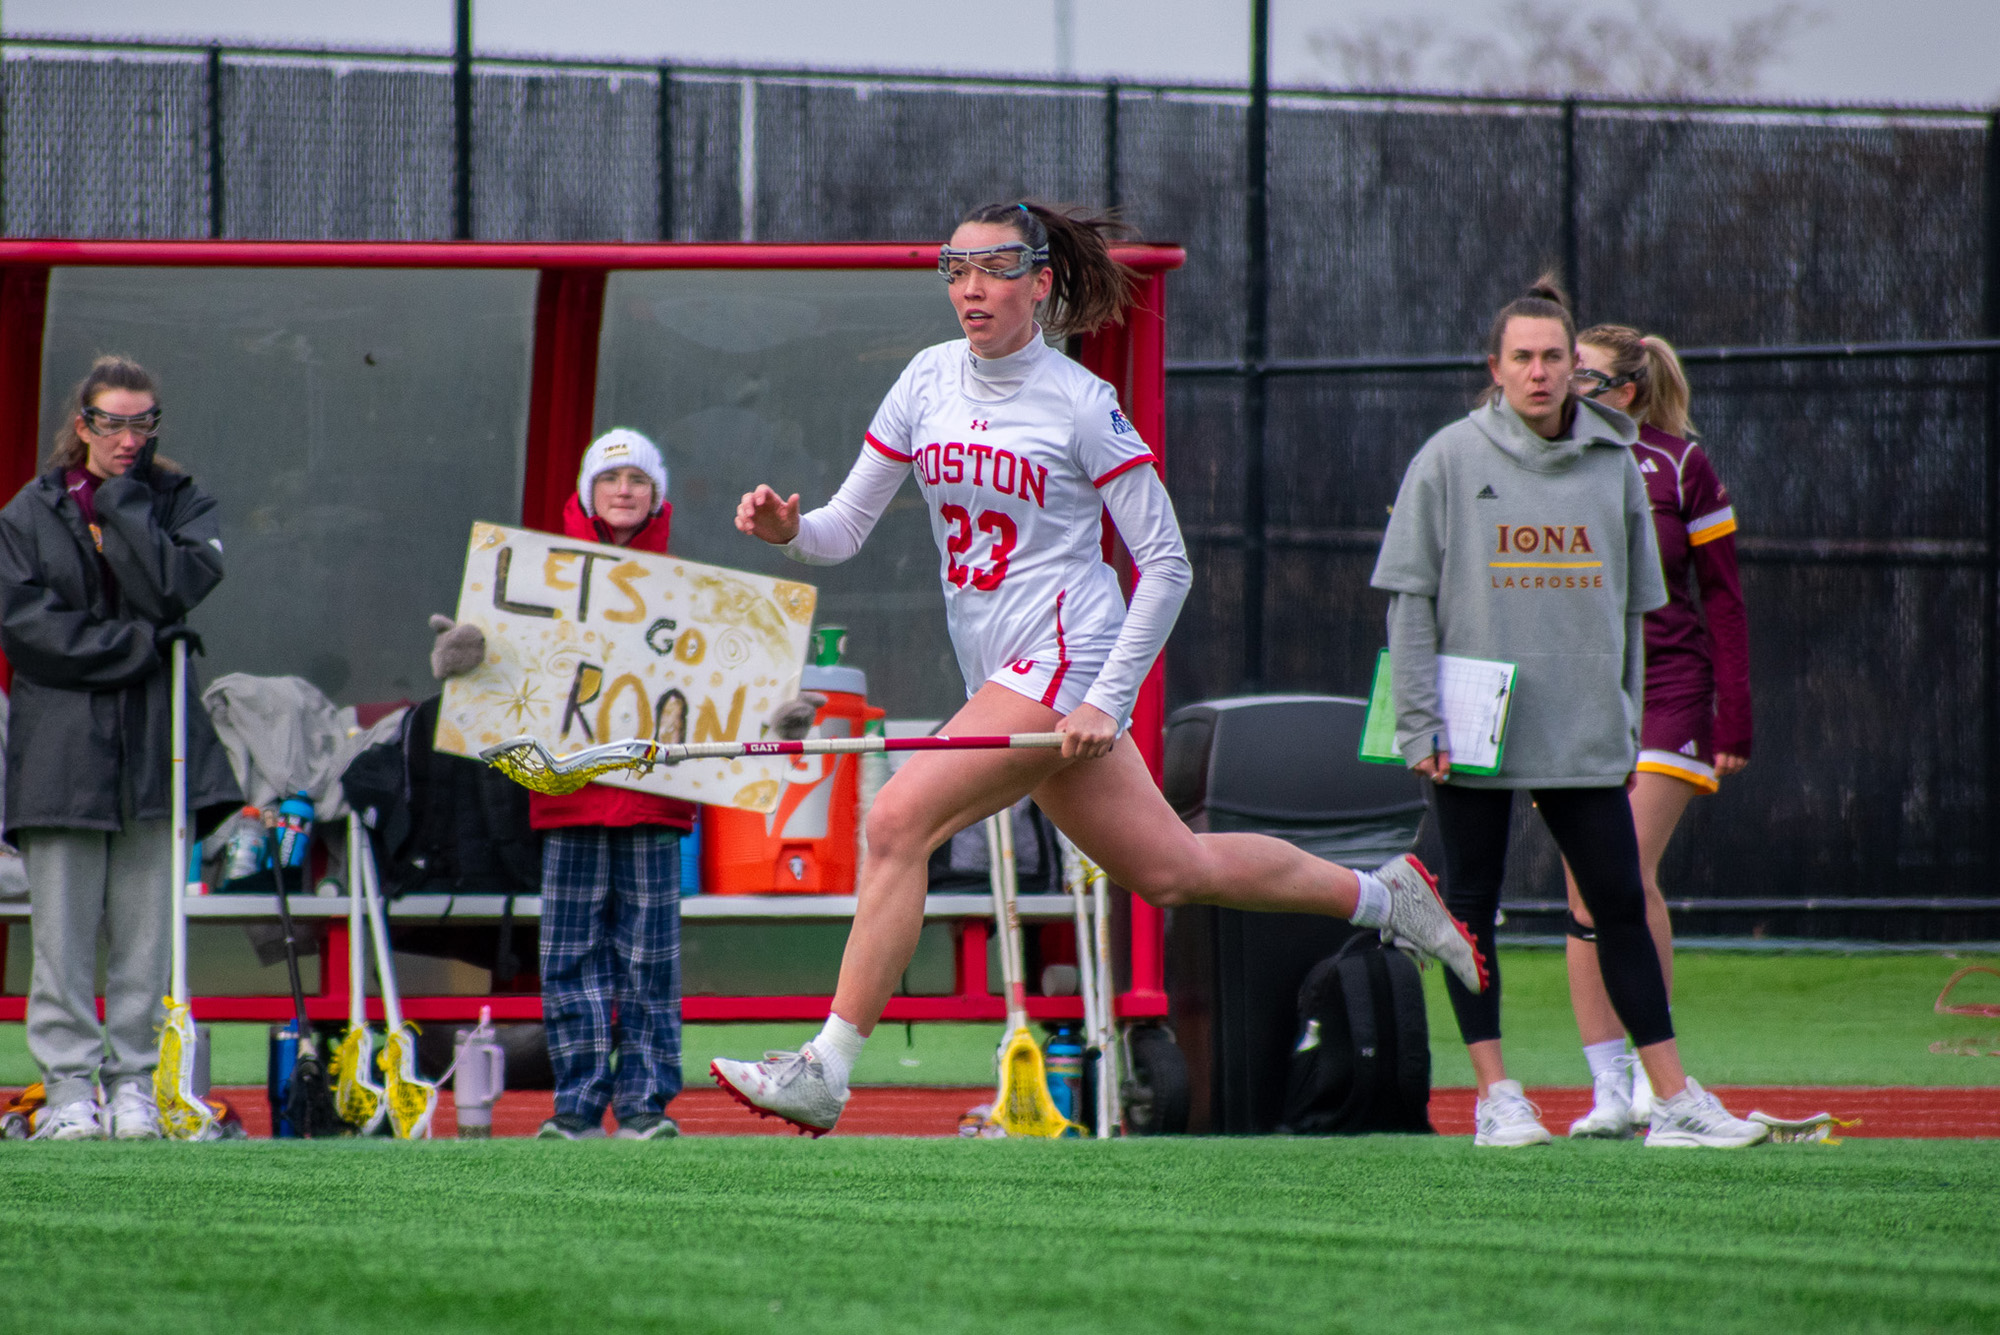 Photo: A woman's lacrosse player running up the sidelines. She is carrying a lacrosse stick and her uniform is white with red accents